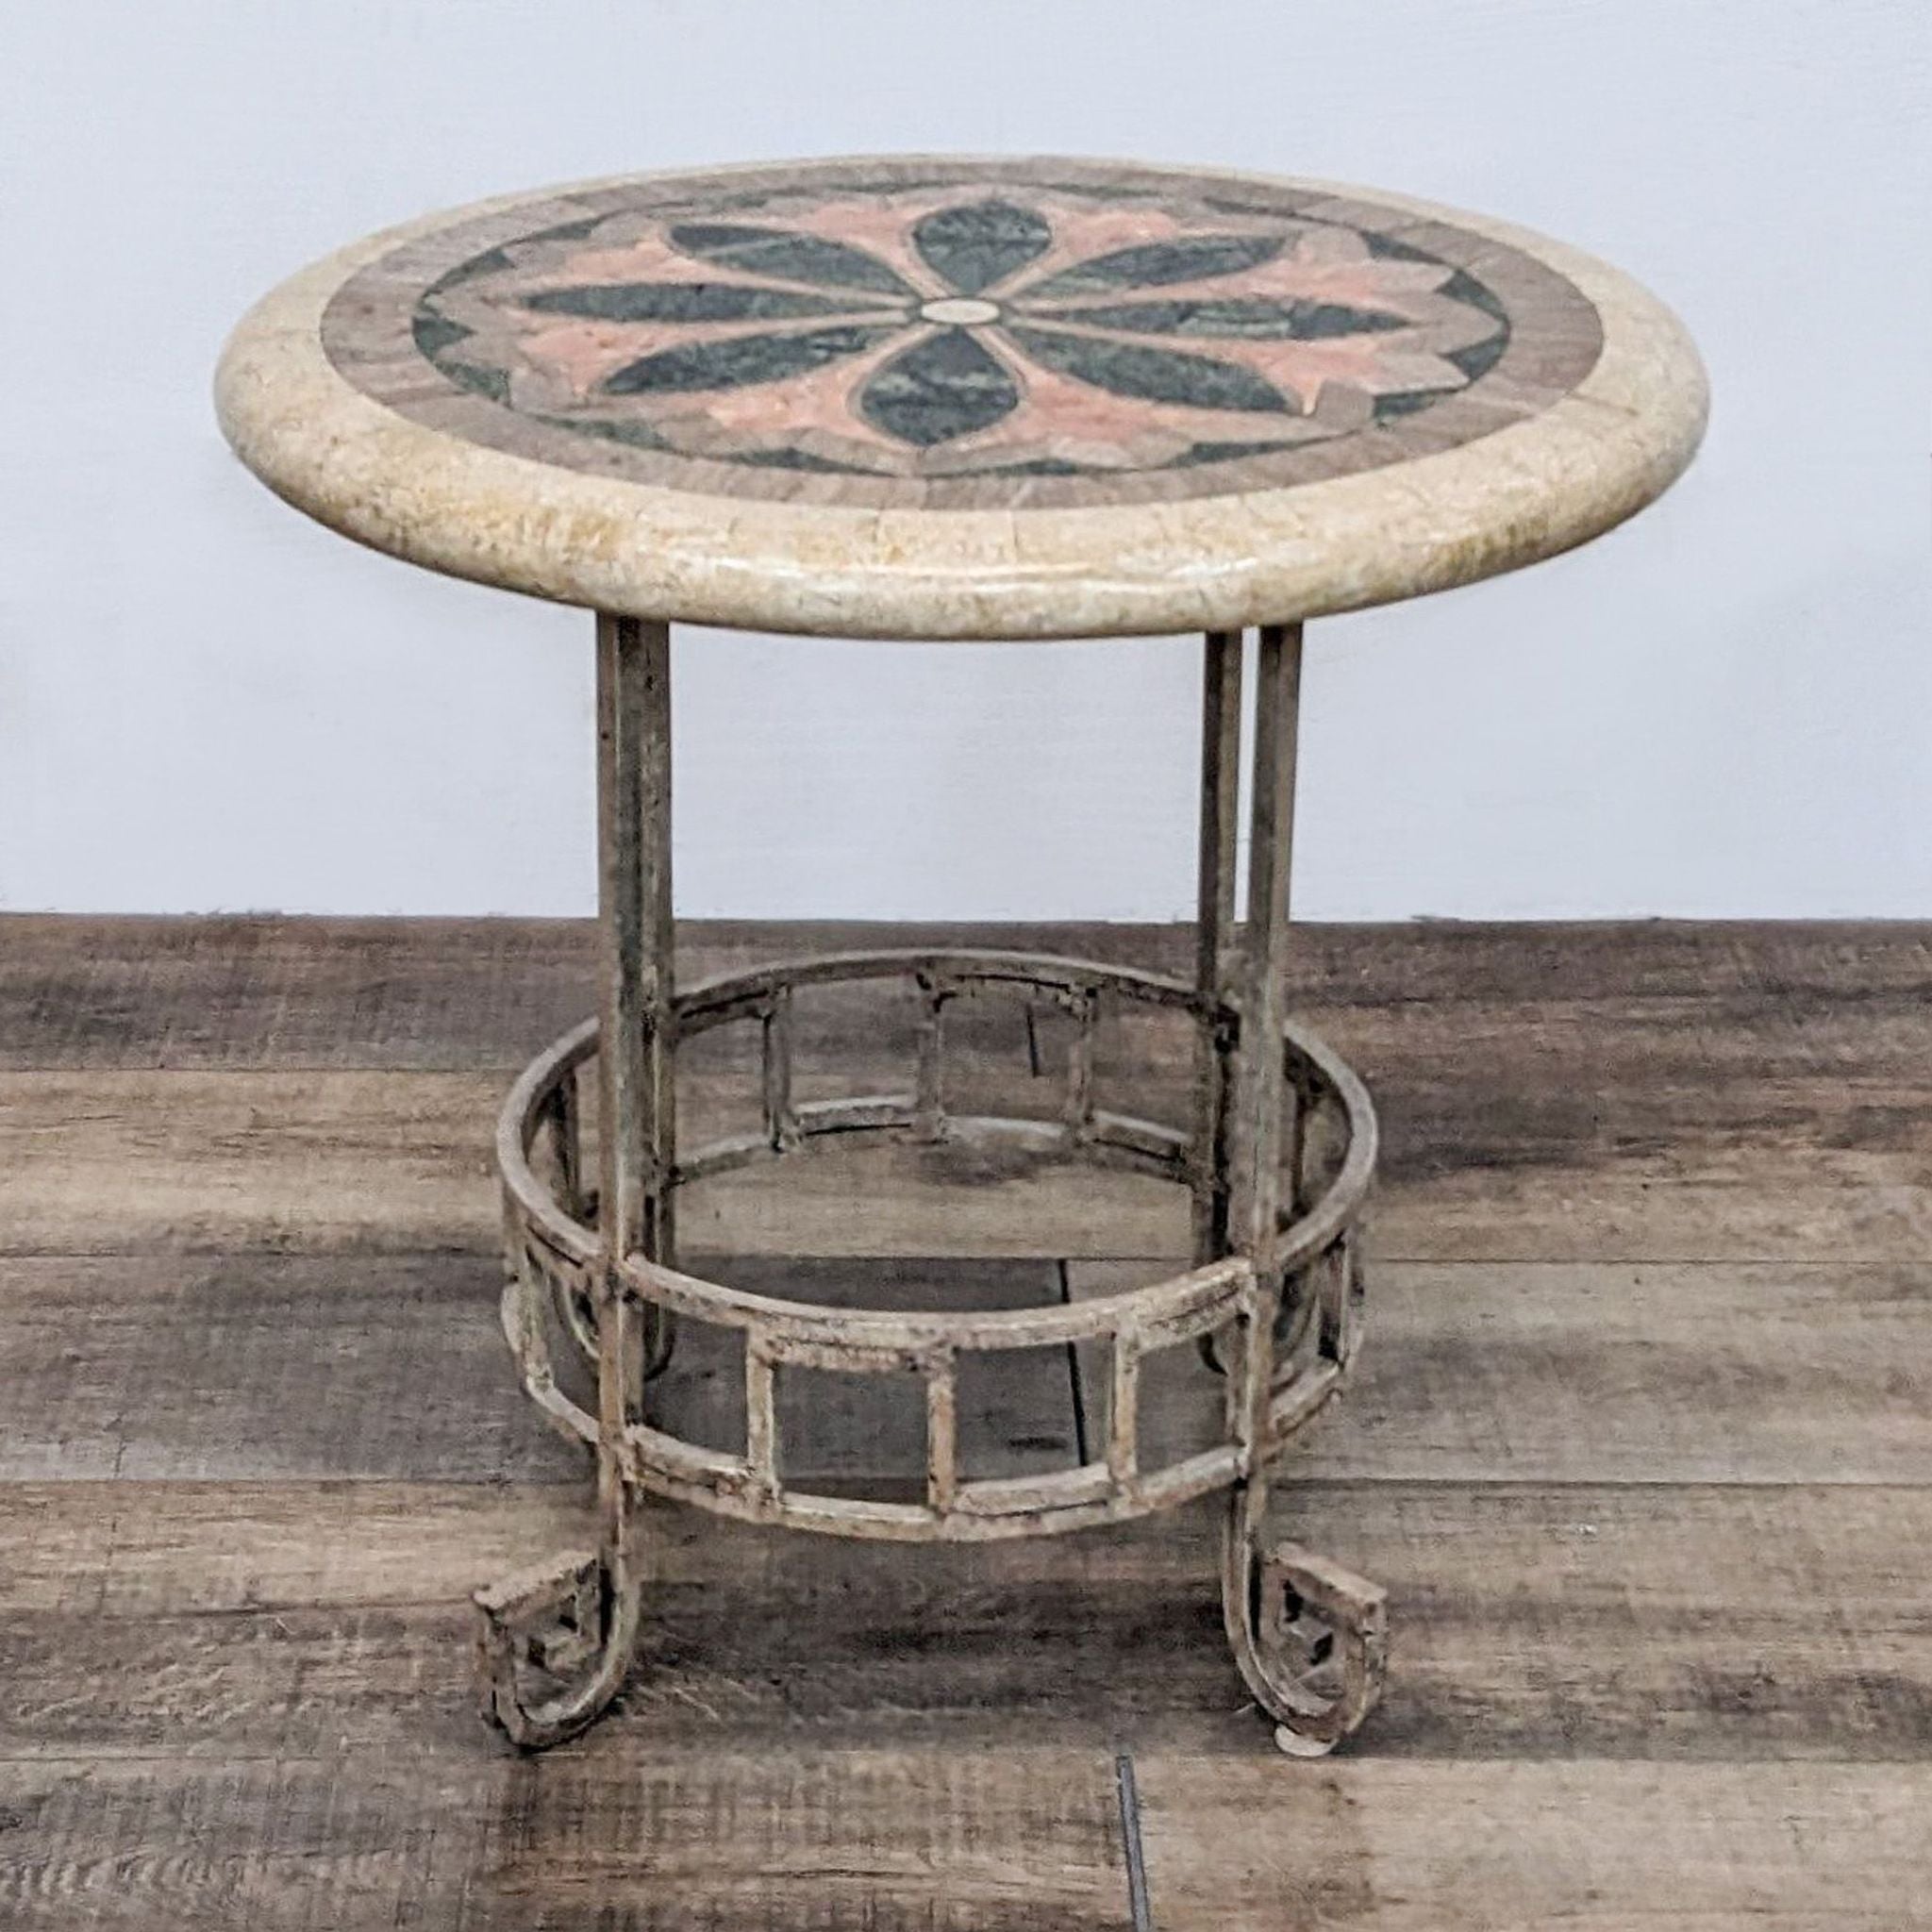 Reperch end table with a round, faux stone top featuring a decorative pattern on a metal base with lower shelf.